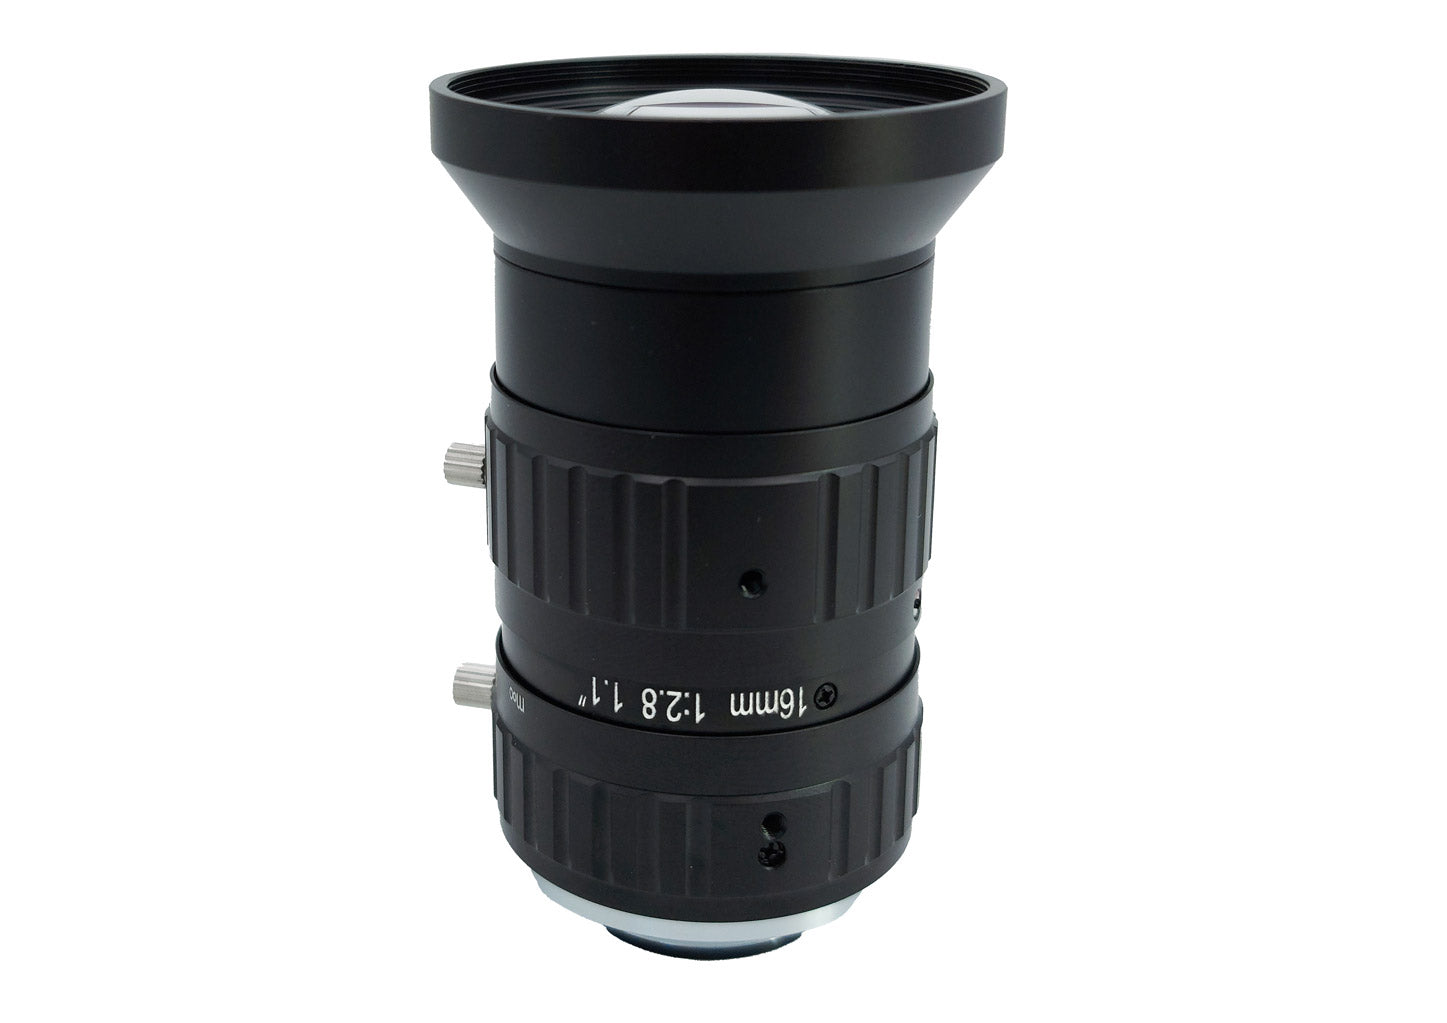 LCM-25MP-16MM-F2.8-1.1-ND1, LENS C-mount, 25MP, 16MM, F2.8, 1.1", NON DISTORTION